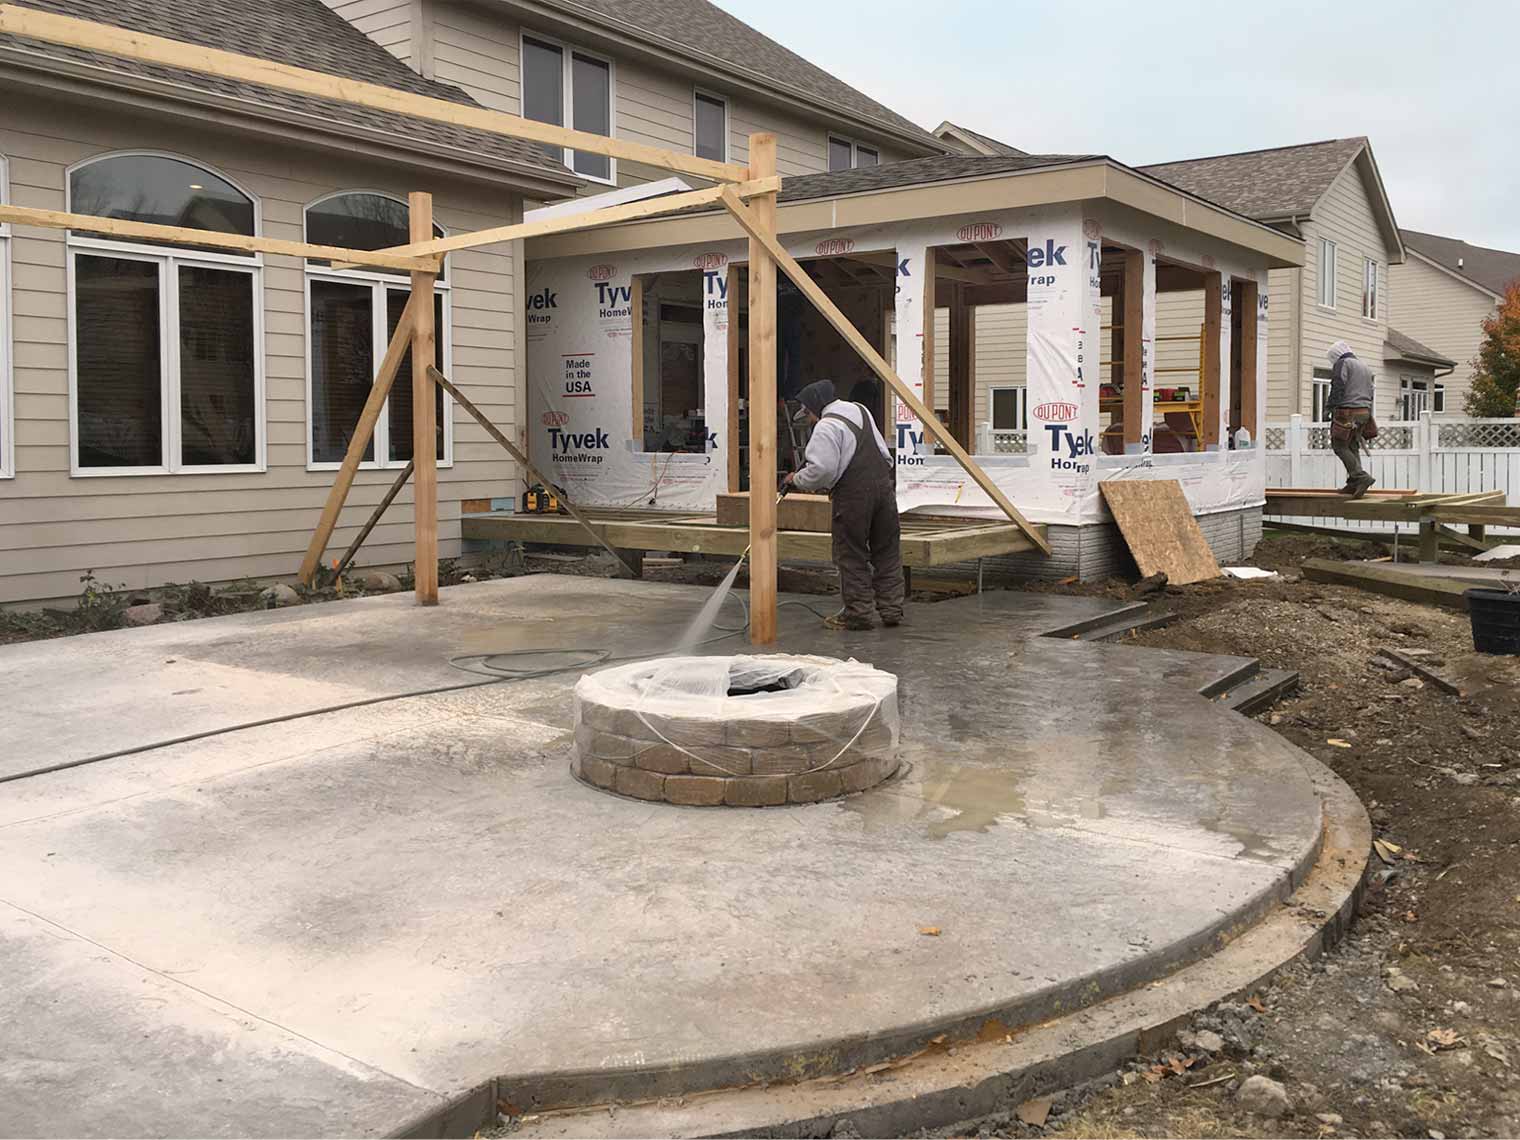 during construction of sunroom addition, new patio, fire pit and pergola designed and being built by Silent Rivers of Des Moines, Iowa